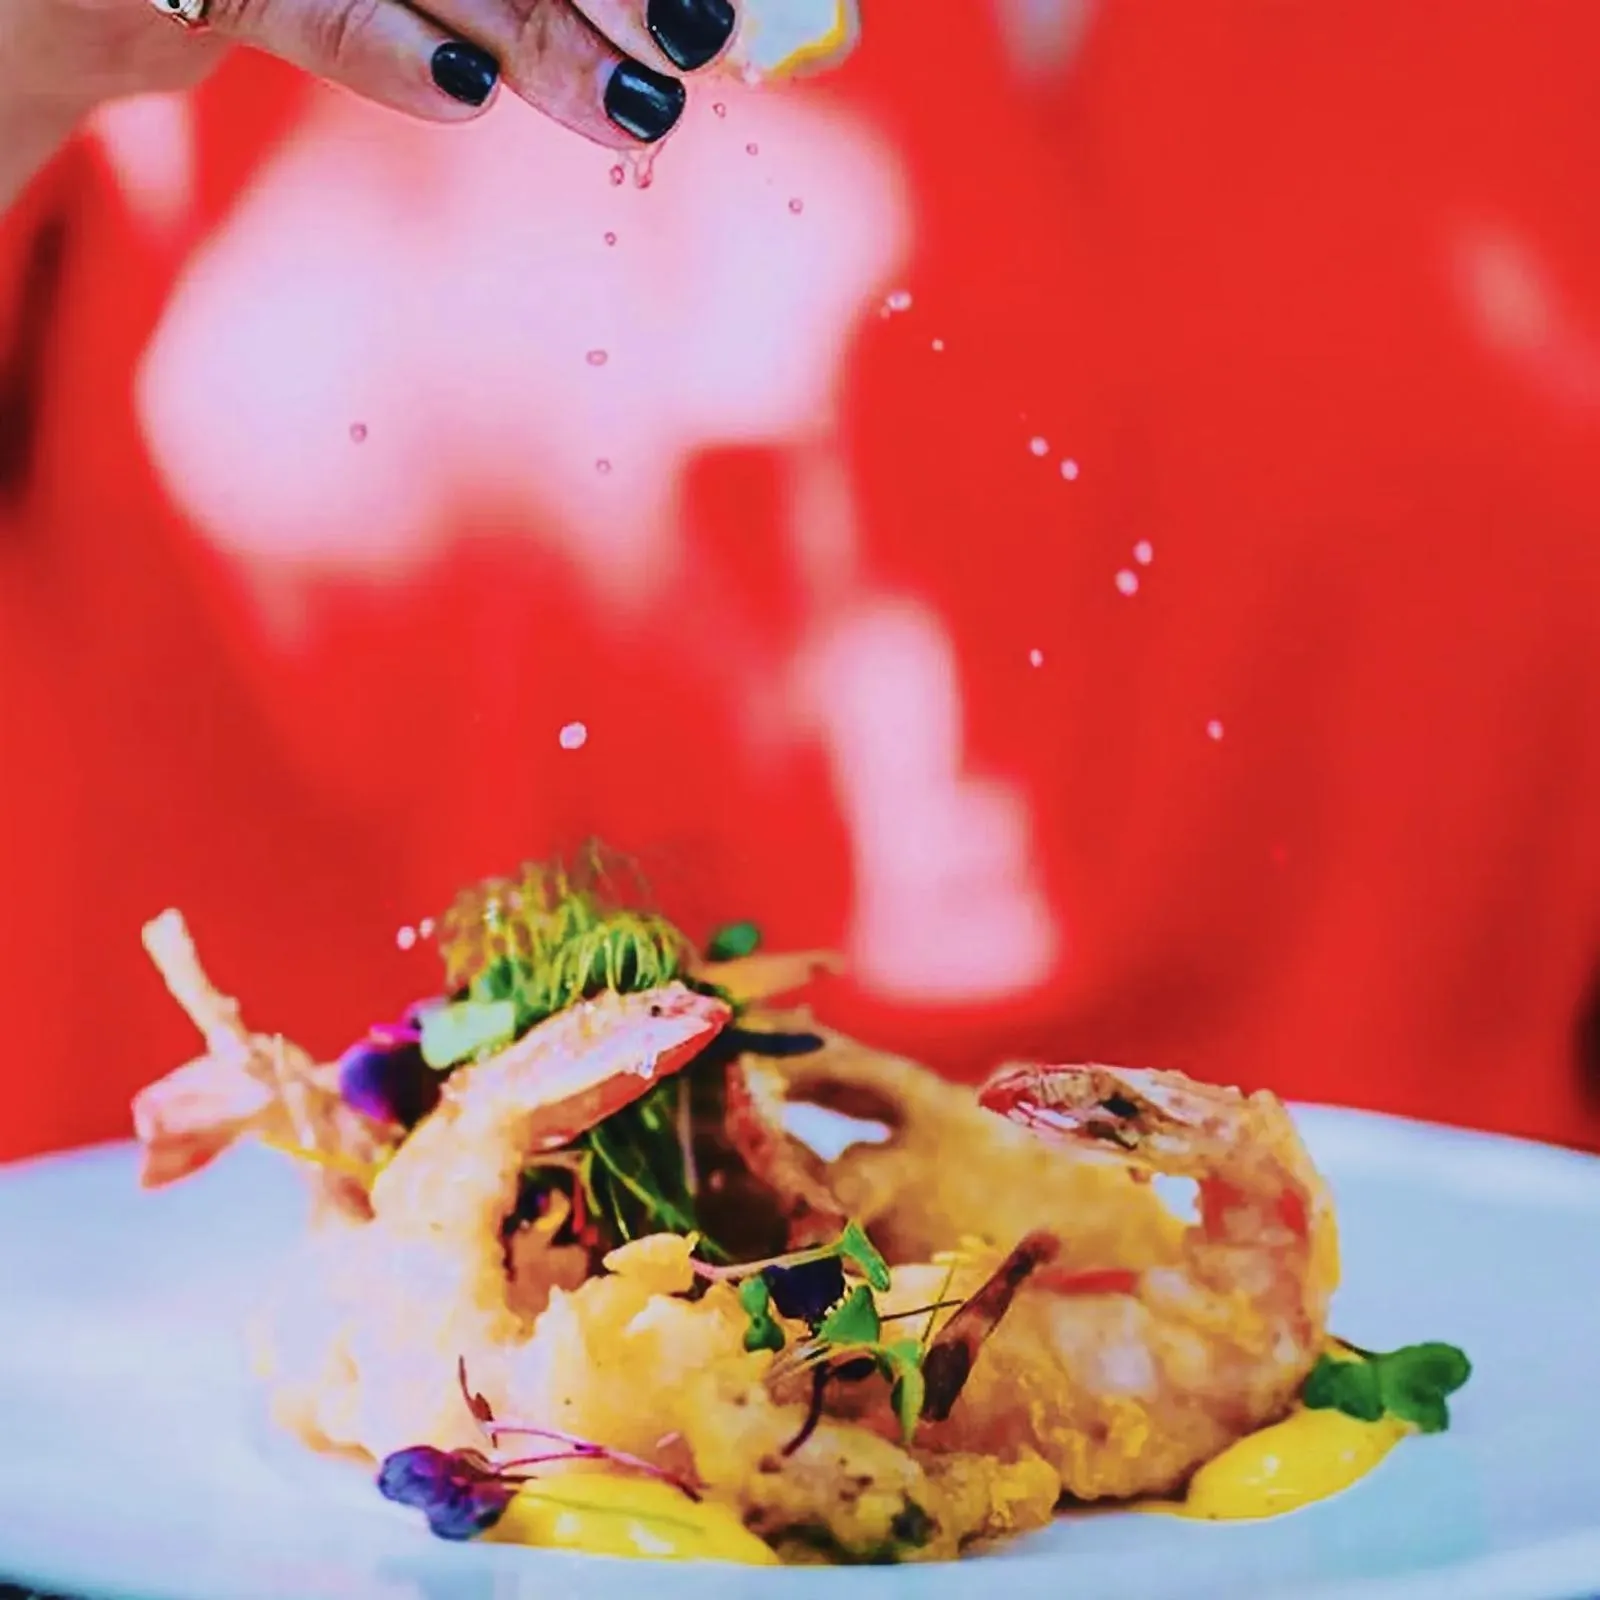 A person sprinkling salt onto a plate of seafood